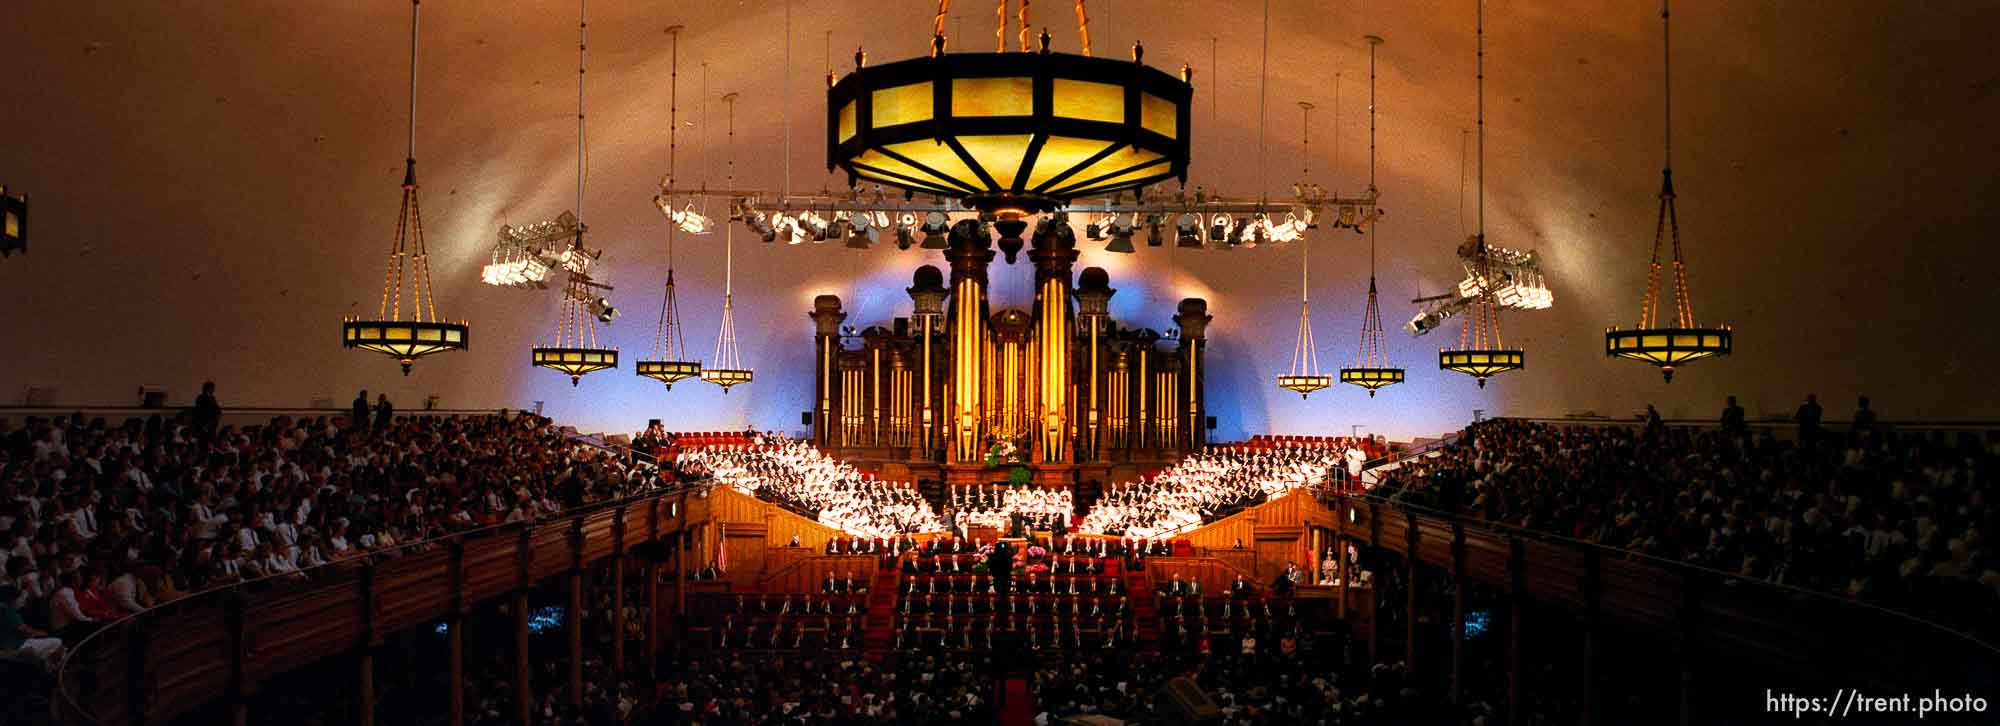 LDS General Conference